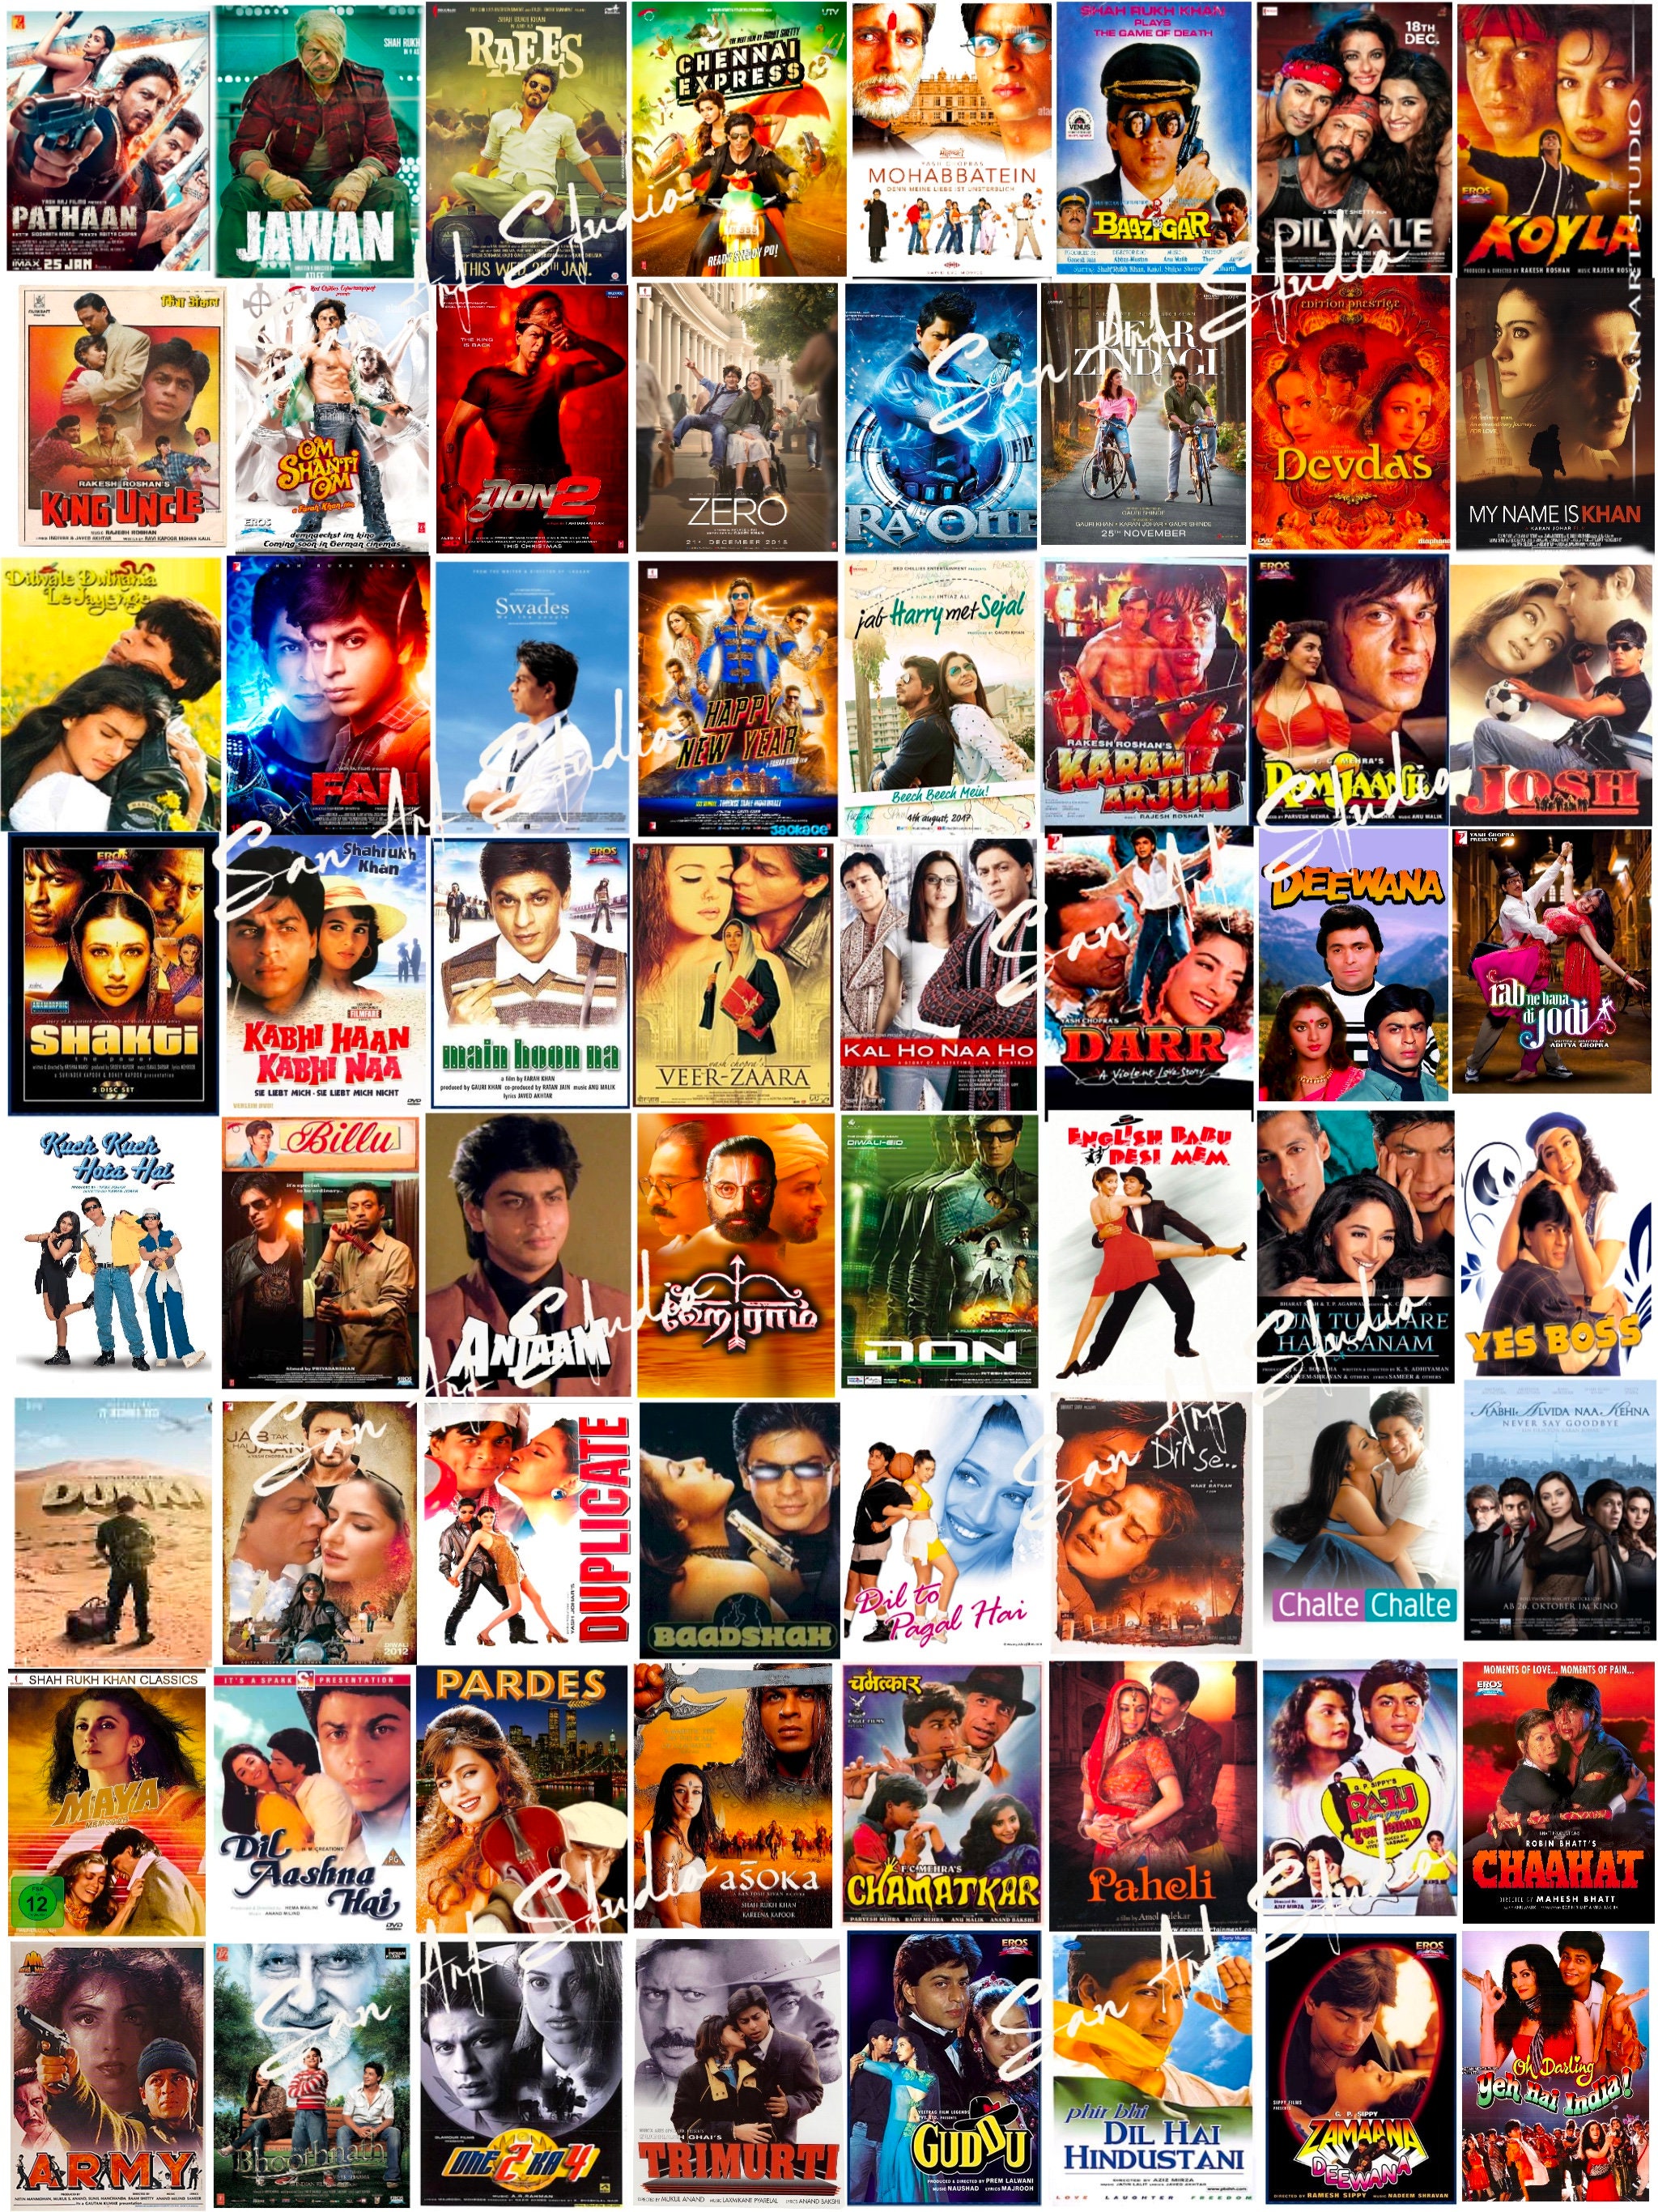 Shahrukh Khan Movie Collection picture pic